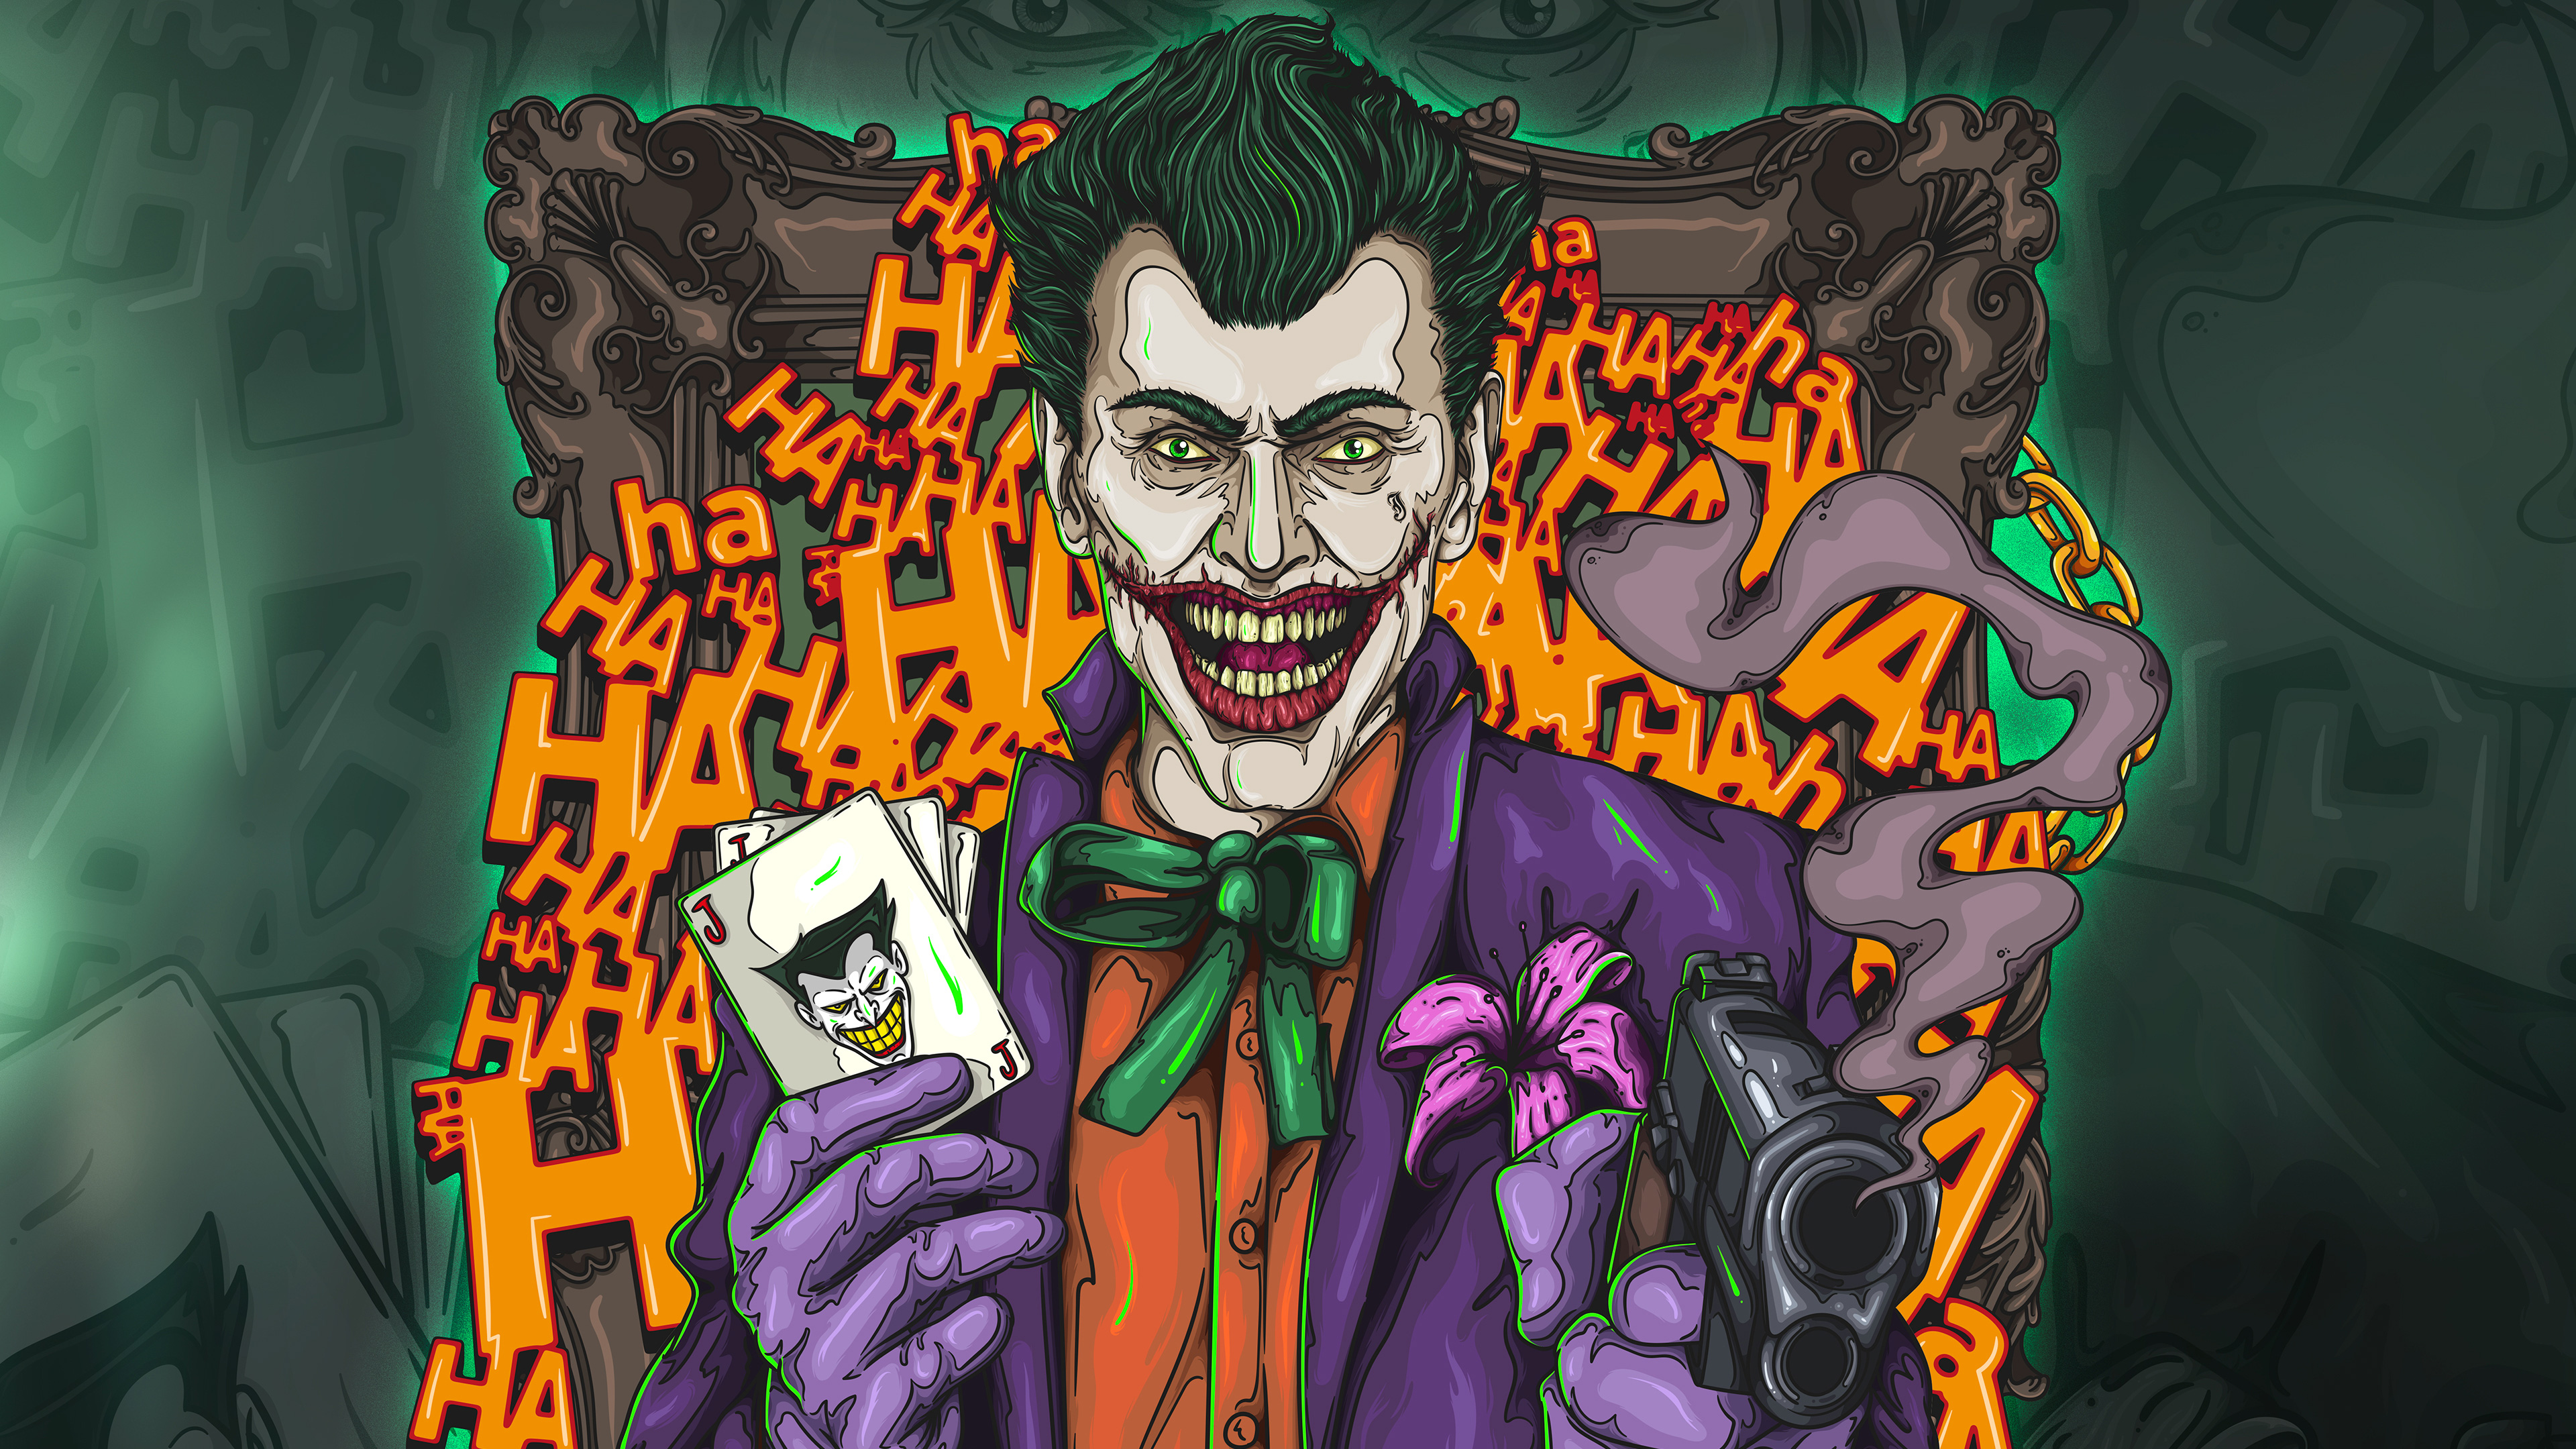 10 Greatest 4k wallpaper pc joker You Can Save It Free Of Charge ...